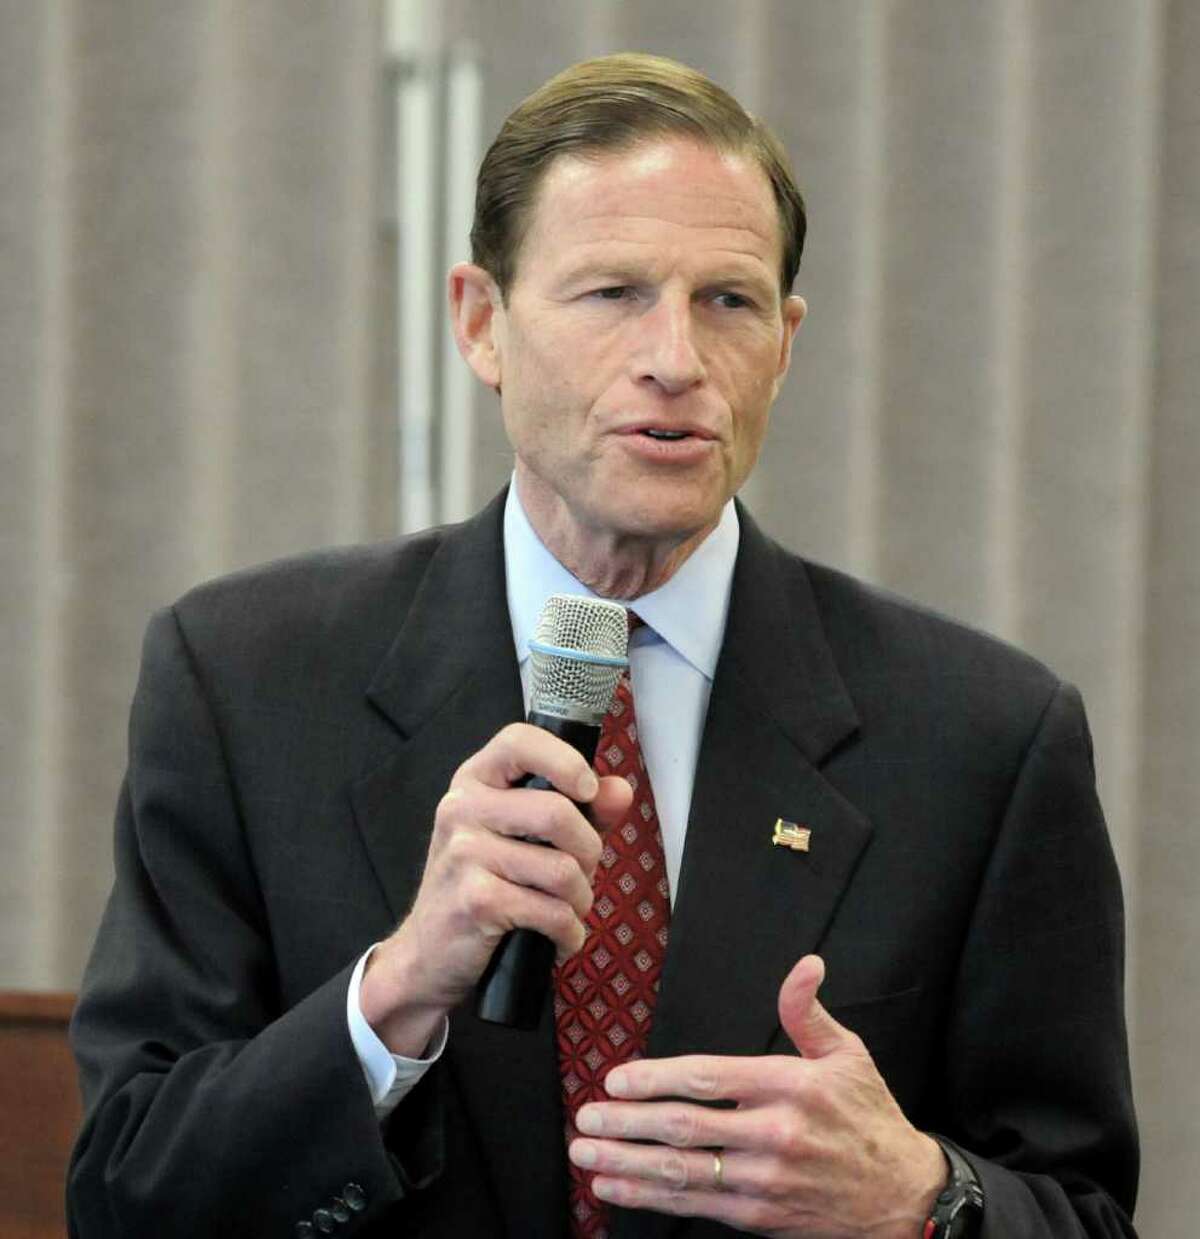 U.S. Senator Richard Blumenthal visited Cartus in Danbury on Wednesday April 20, 2011. The senator takes questions during a question and answer session.